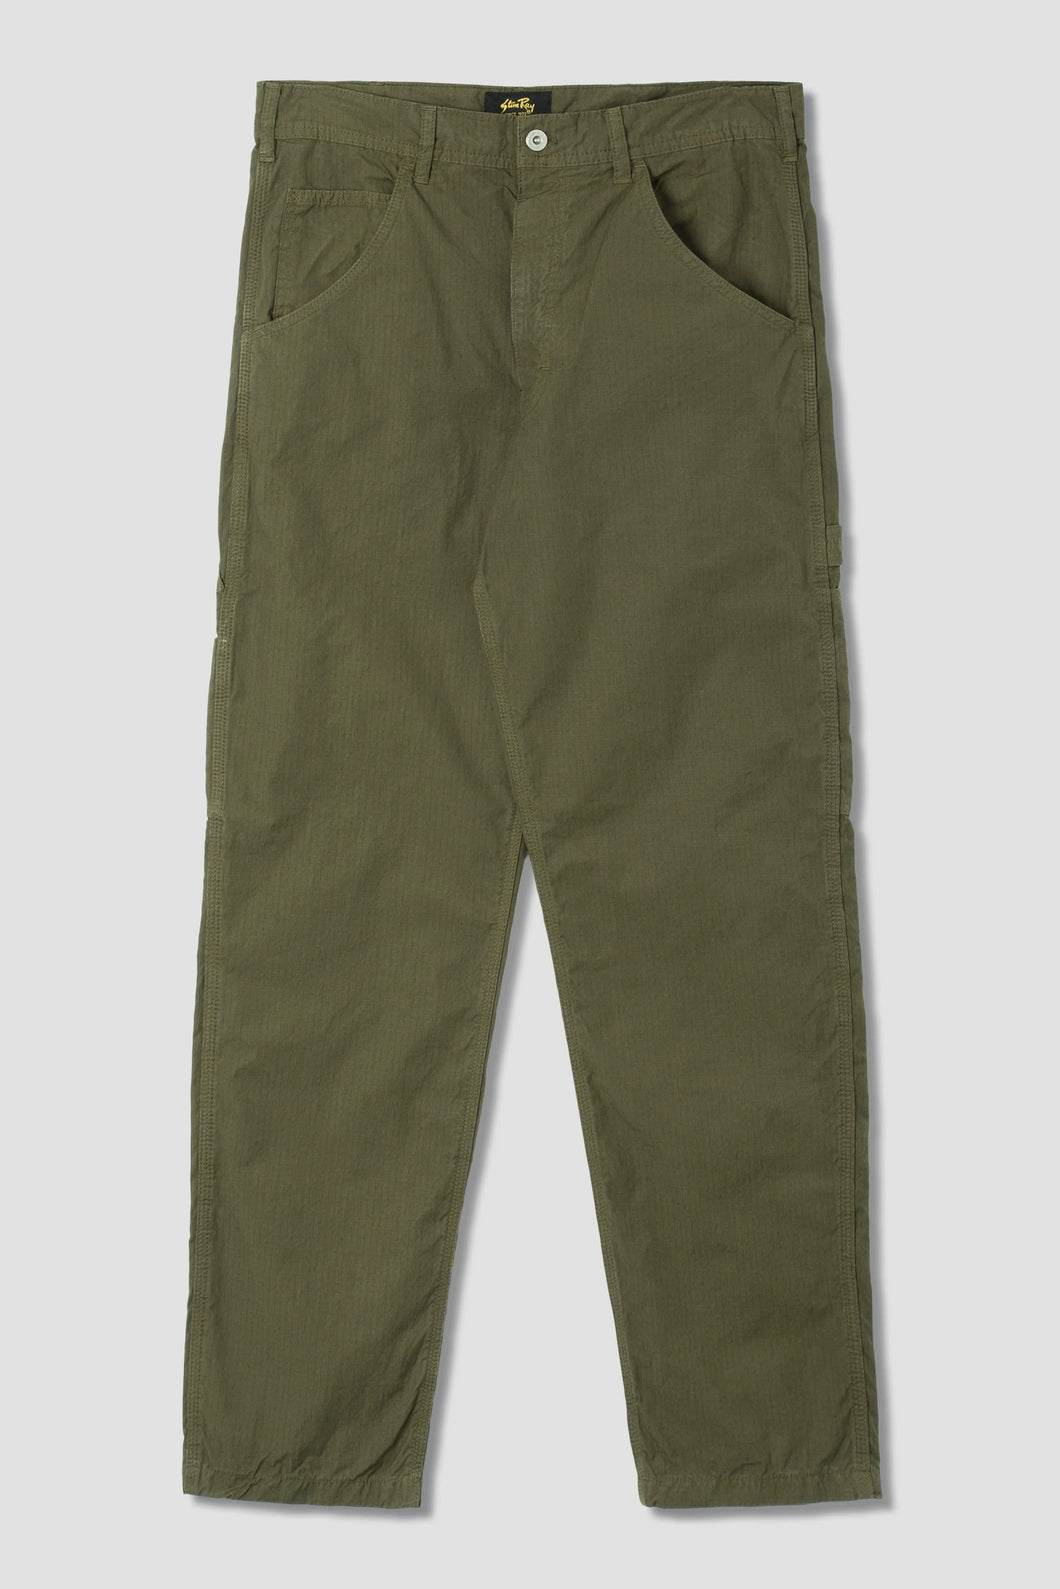 80s PAINTER PANT OLIVE TWILL